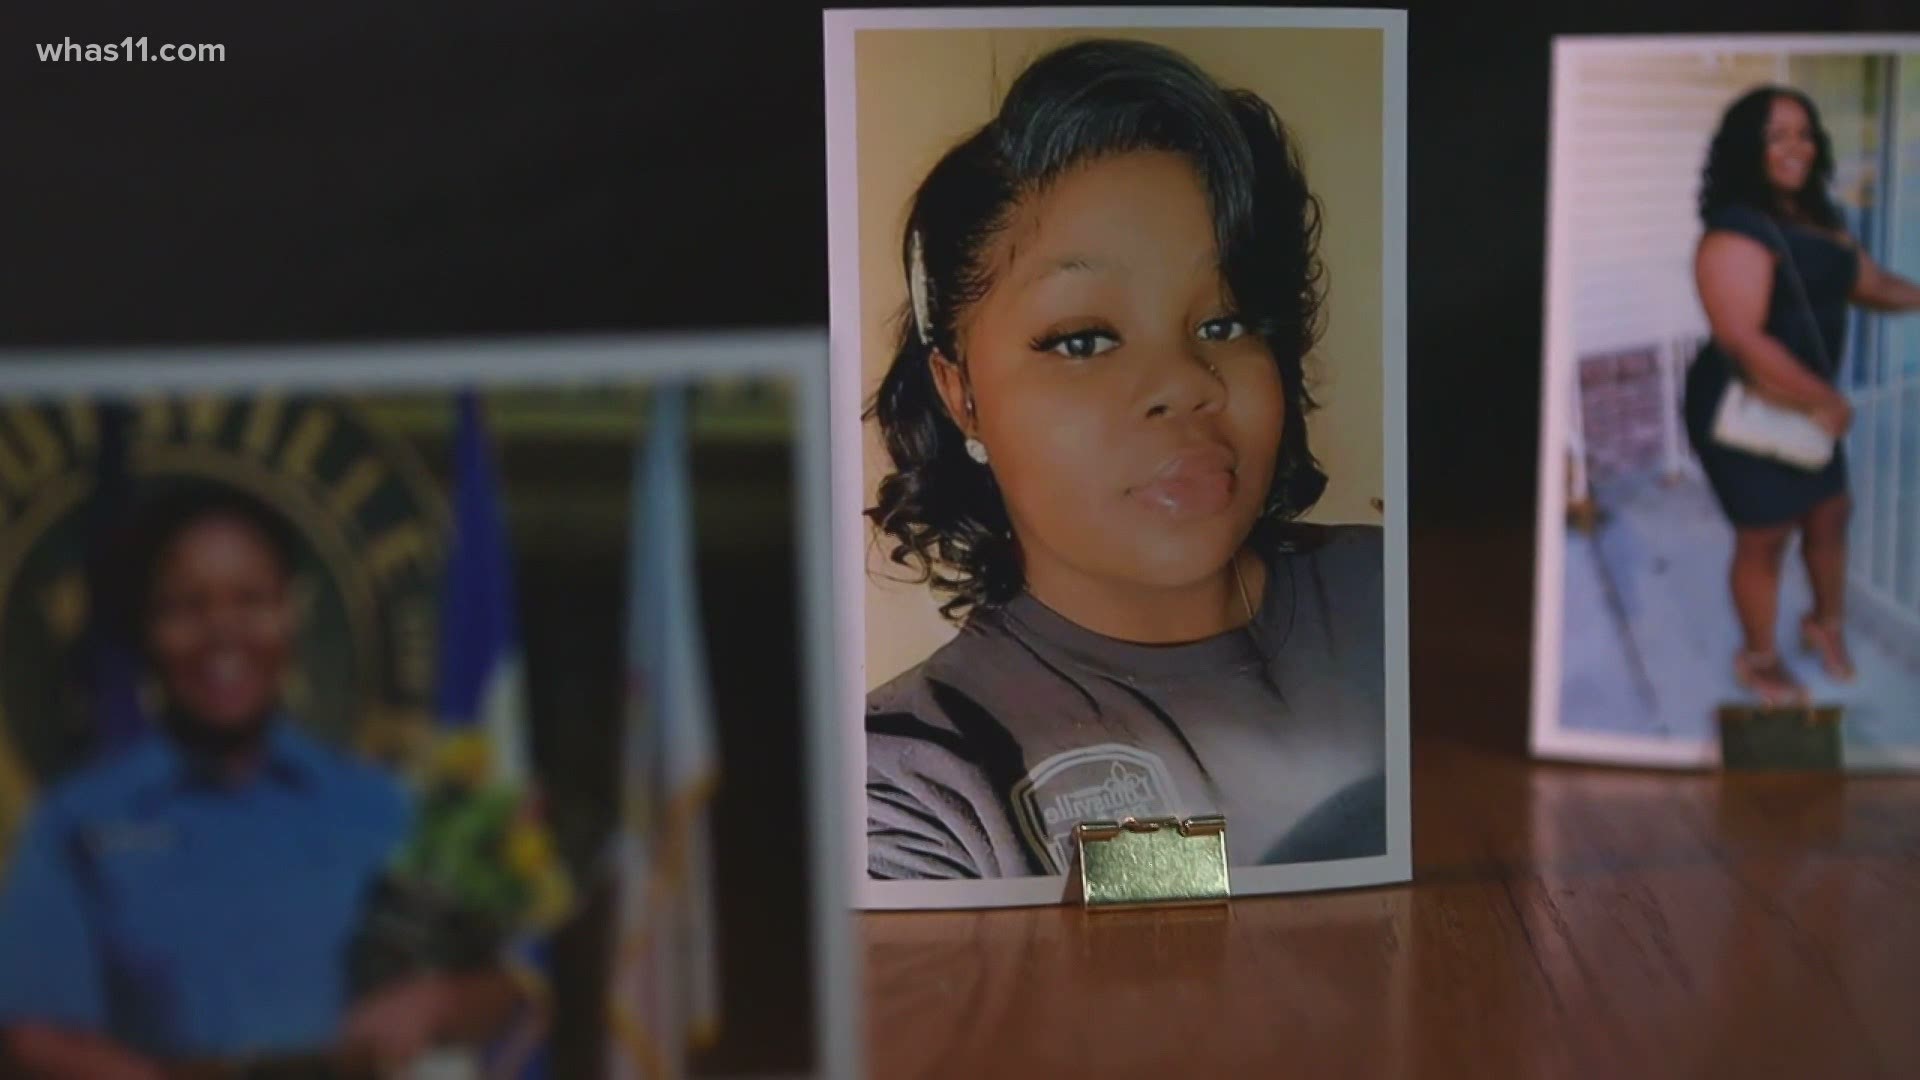 Some changes were made quickly like passing Breonna's law in Louisville to ban no-knock search warrants.